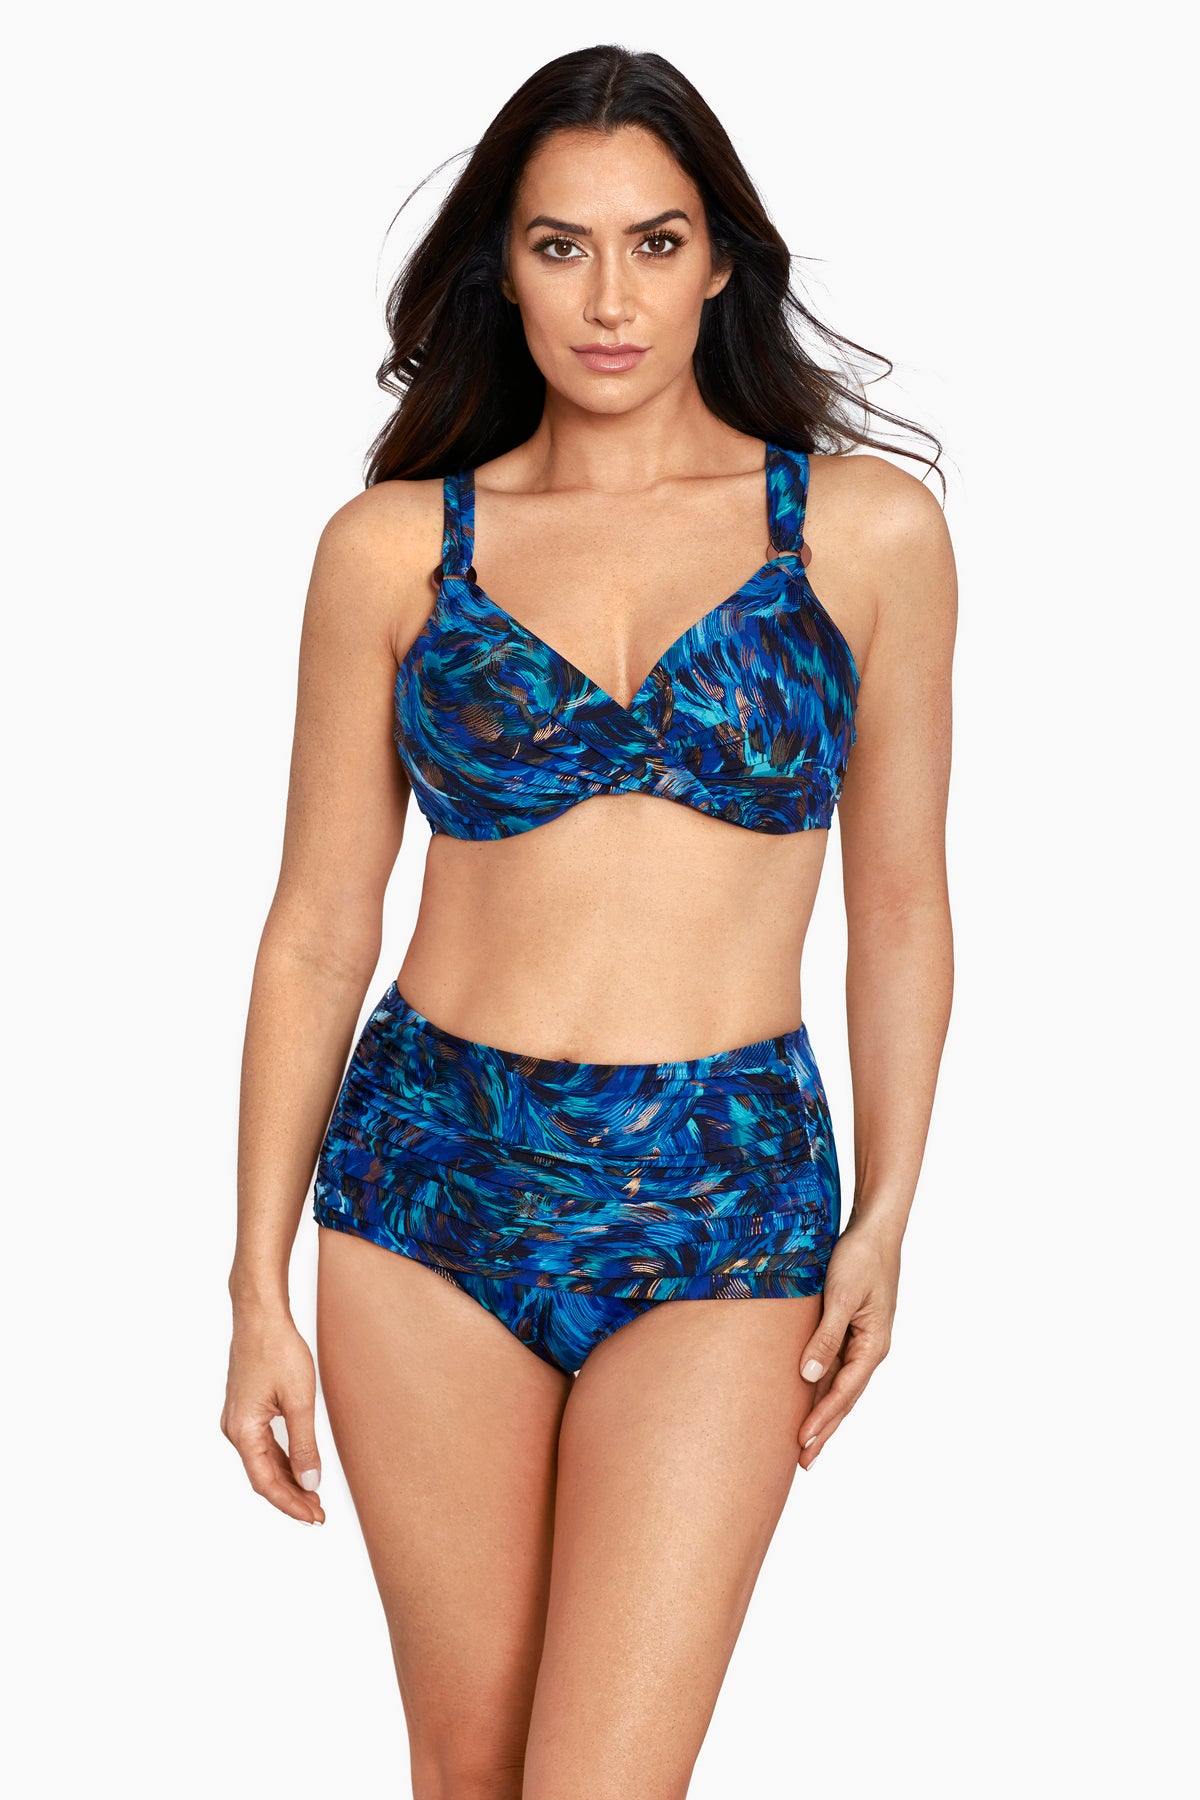 Miraclesuit Spotted Surplice Bra Top D-DDD Cups